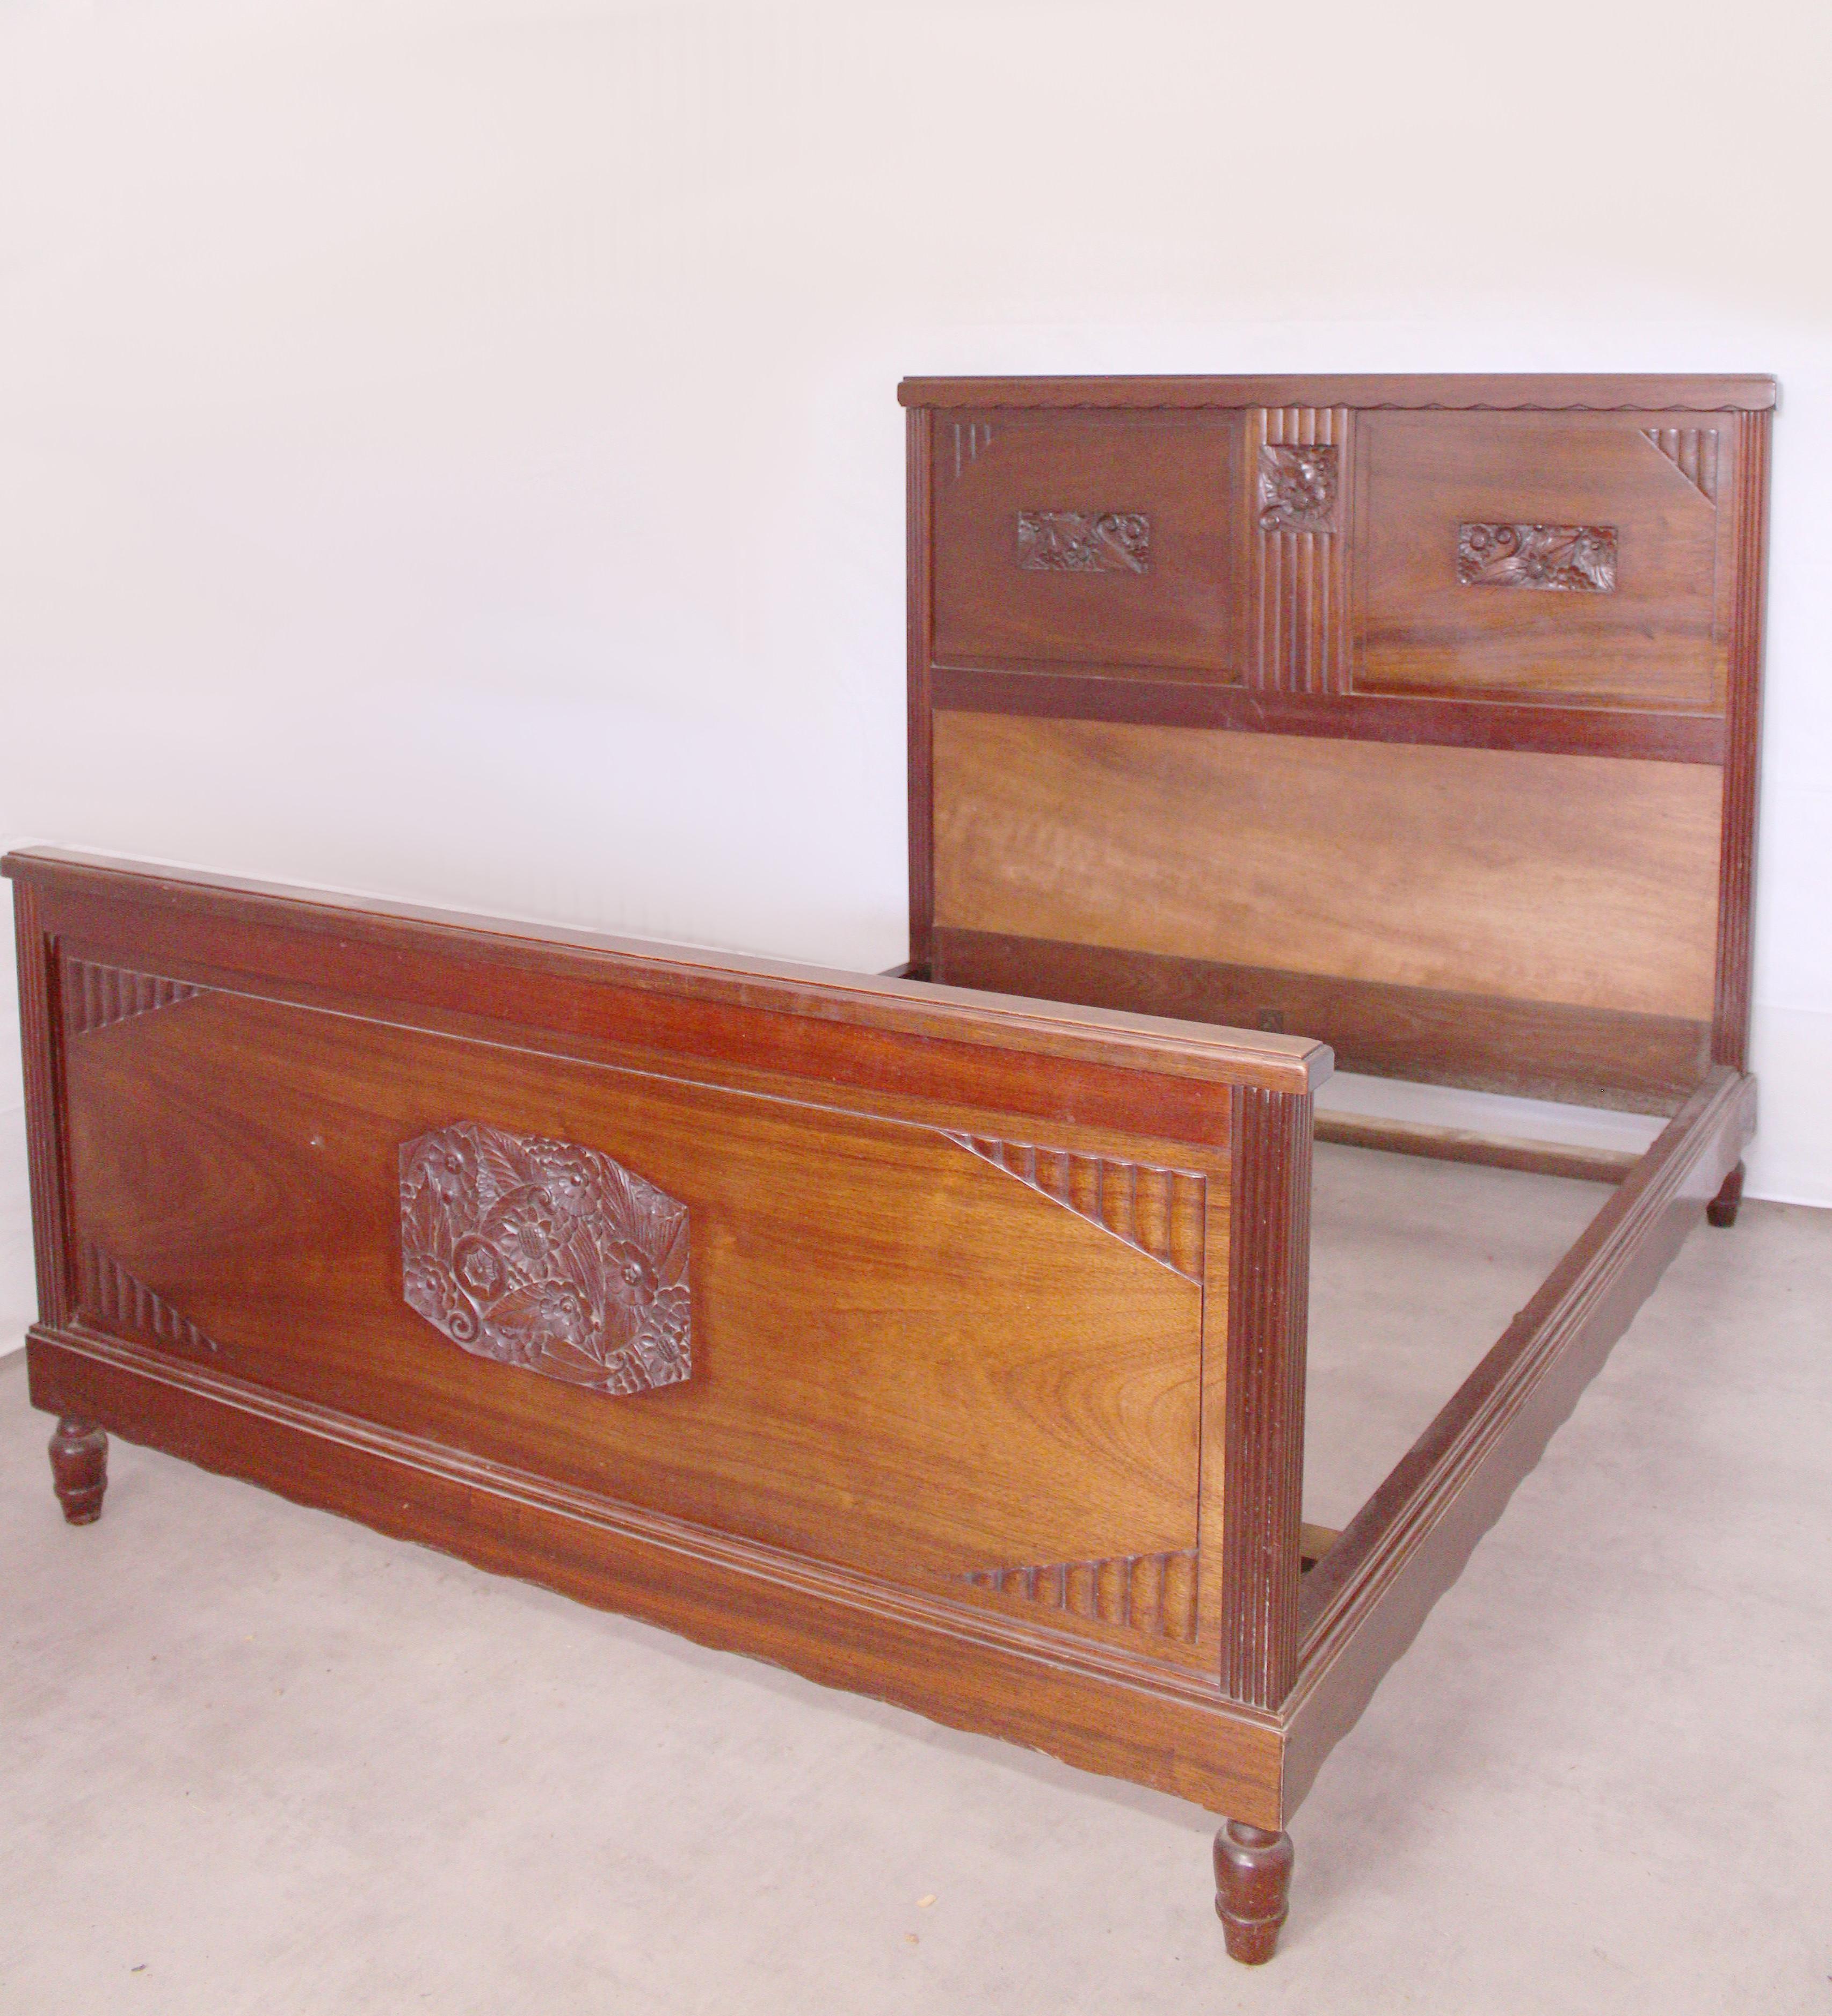 20th Century French Art Deco Bed US Queen UK King Size Mahogany, circa 1930